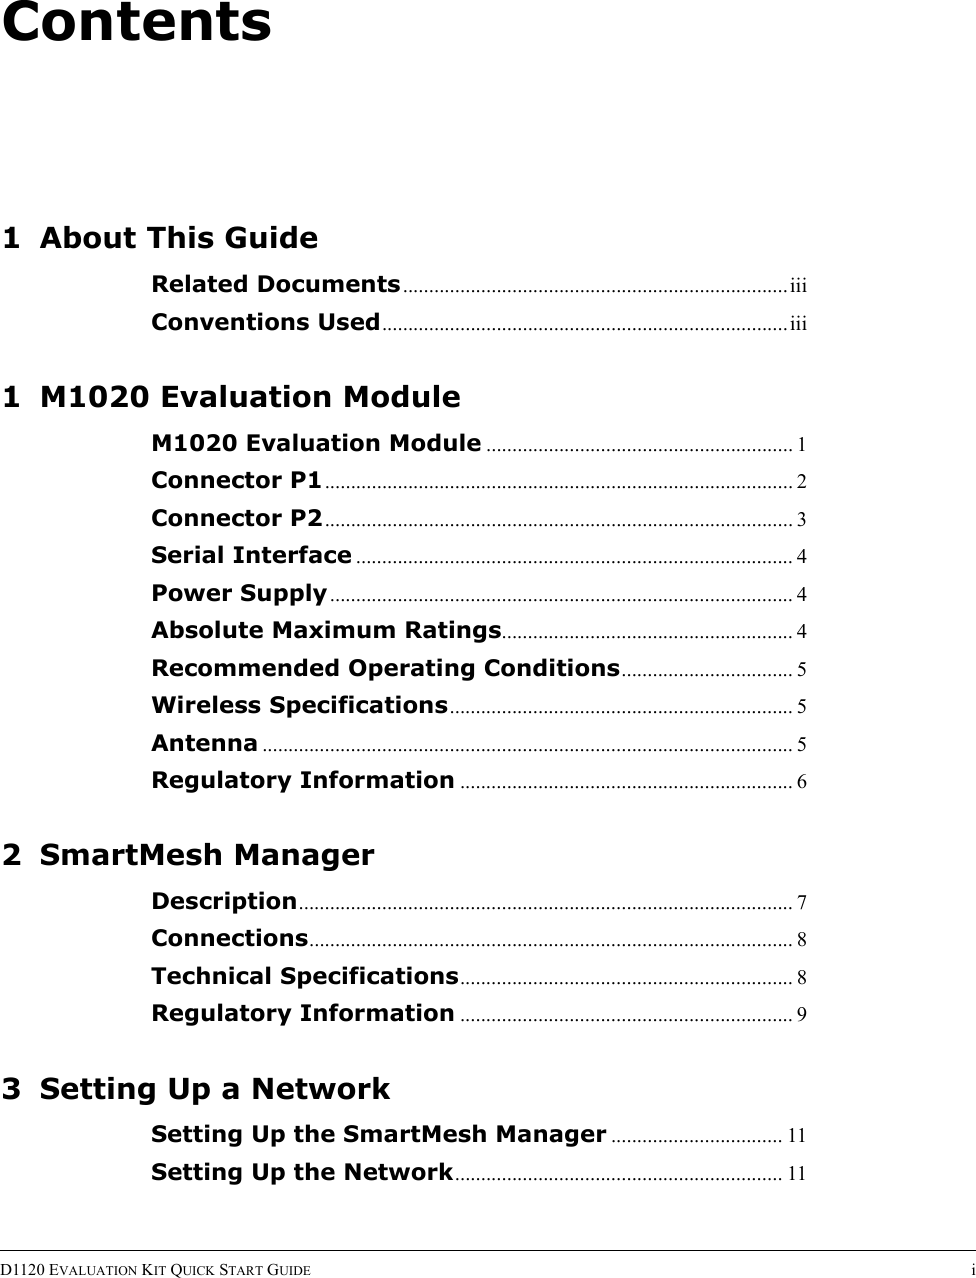 ContentsD1120 EVALUATION KIT QUICK START GUIDE i1 About This GuideRelated Documents..........................................................................iiiConventions Used..............................................................................iii1 M1020 Evaluation ModuleM1020 Evaluation Module ........................................................... 1Connector P1.......................................................................................... 2Connector P2.......................................................................................... 3Serial Interface .................................................................................... 4Power Supply......................................................................................... 4Absolute Maximum Ratings........................................................ 4Recommended Operating Conditions................................. 5Wireless Specifications.................................................................. 5Antenna ...................................................................................................... 5Regulatory Information ................................................................ 62 SmartMesh ManagerDescription............................................................................................... 7Connections............................................................................................. 8Technical Specifications................................................................ 8Regulatory Information ................................................................ 93 Setting Up a NetworkSetting Up the SmartMesh Manager ................................. 11Setting Up the Network............................................................... 11